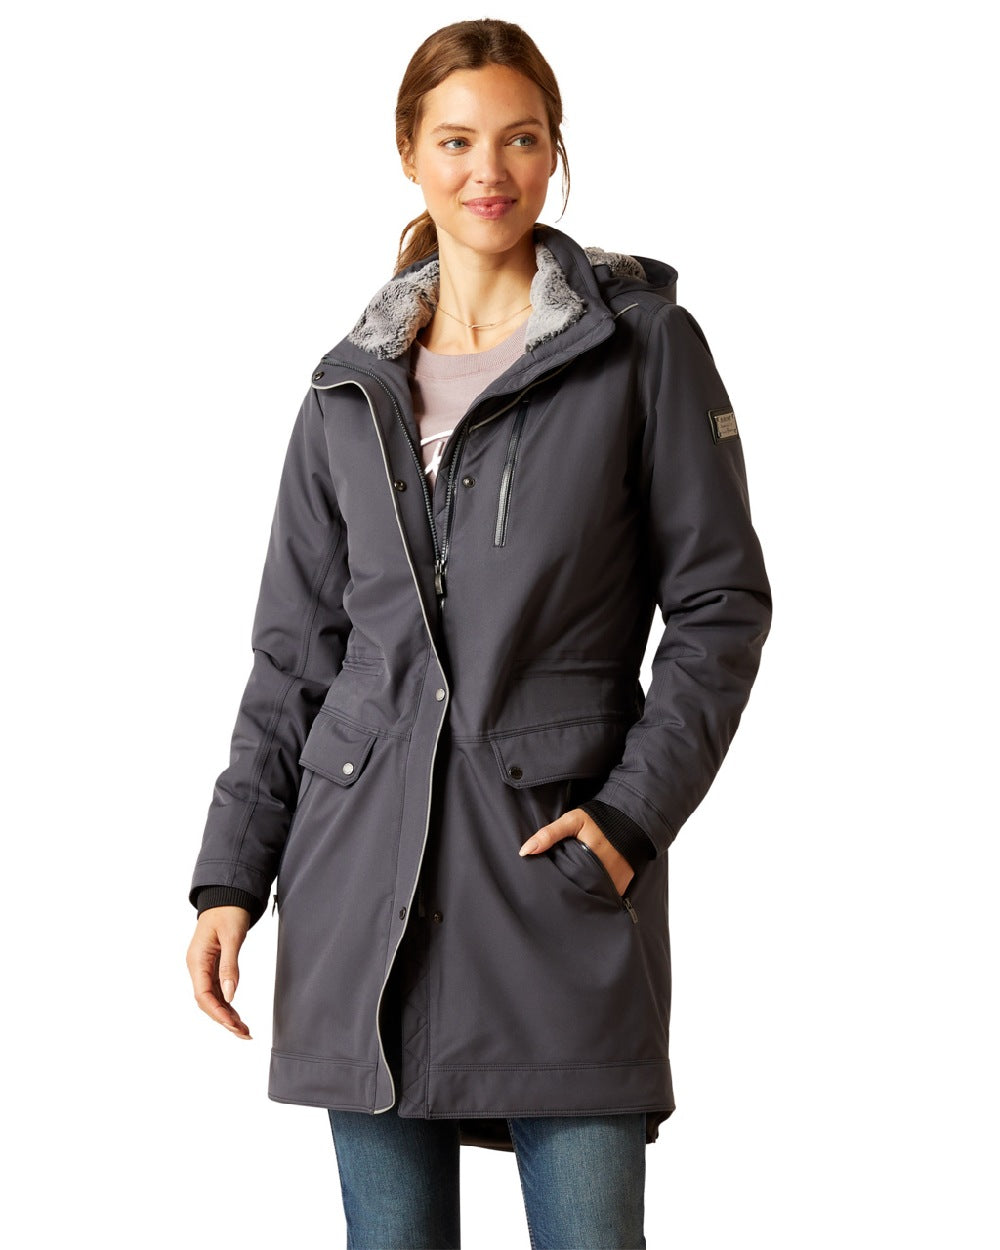 Ariat Womens Tempest Waterproof Insulated Parka in Ebony 